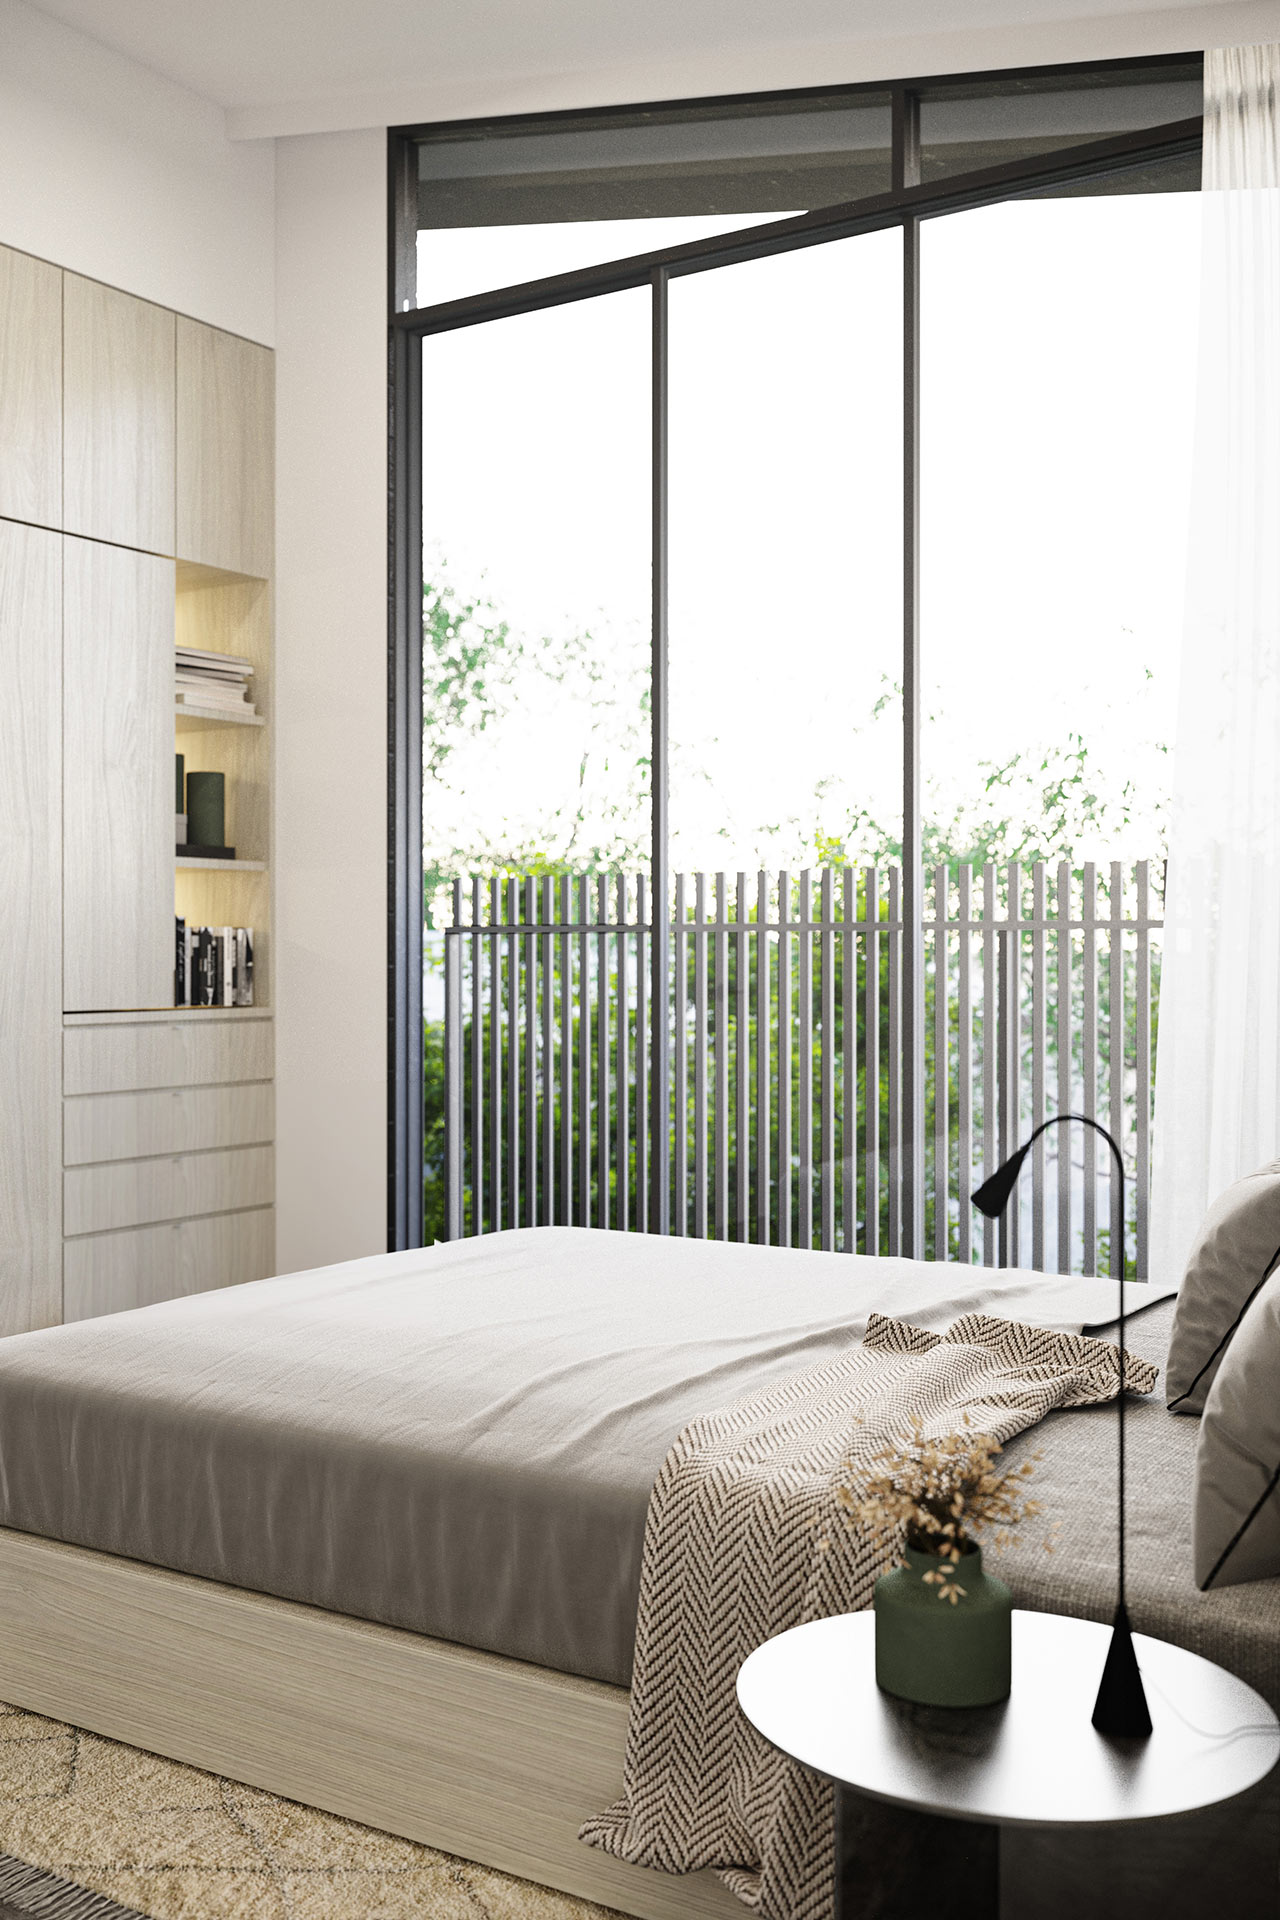 Bedroom with outside view